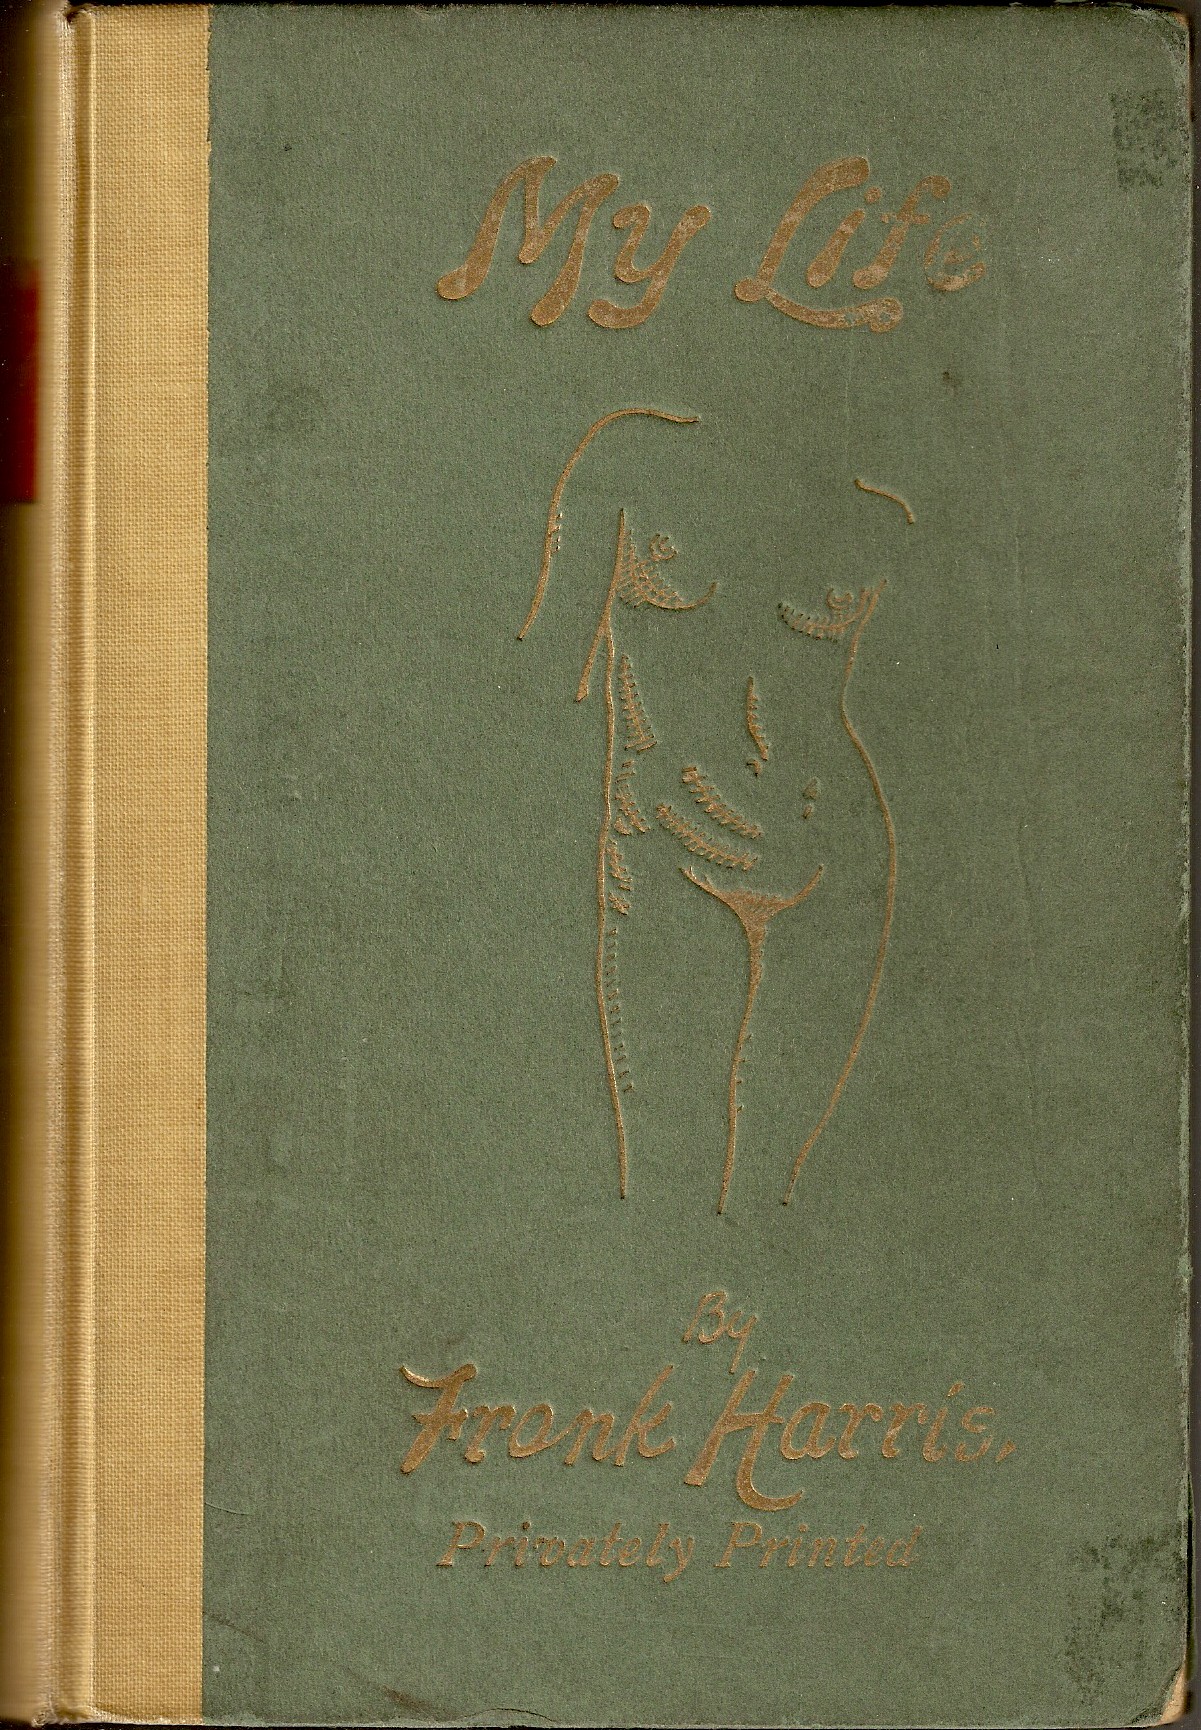 My Life Volume 2 by Frank Harris, Privately Printed